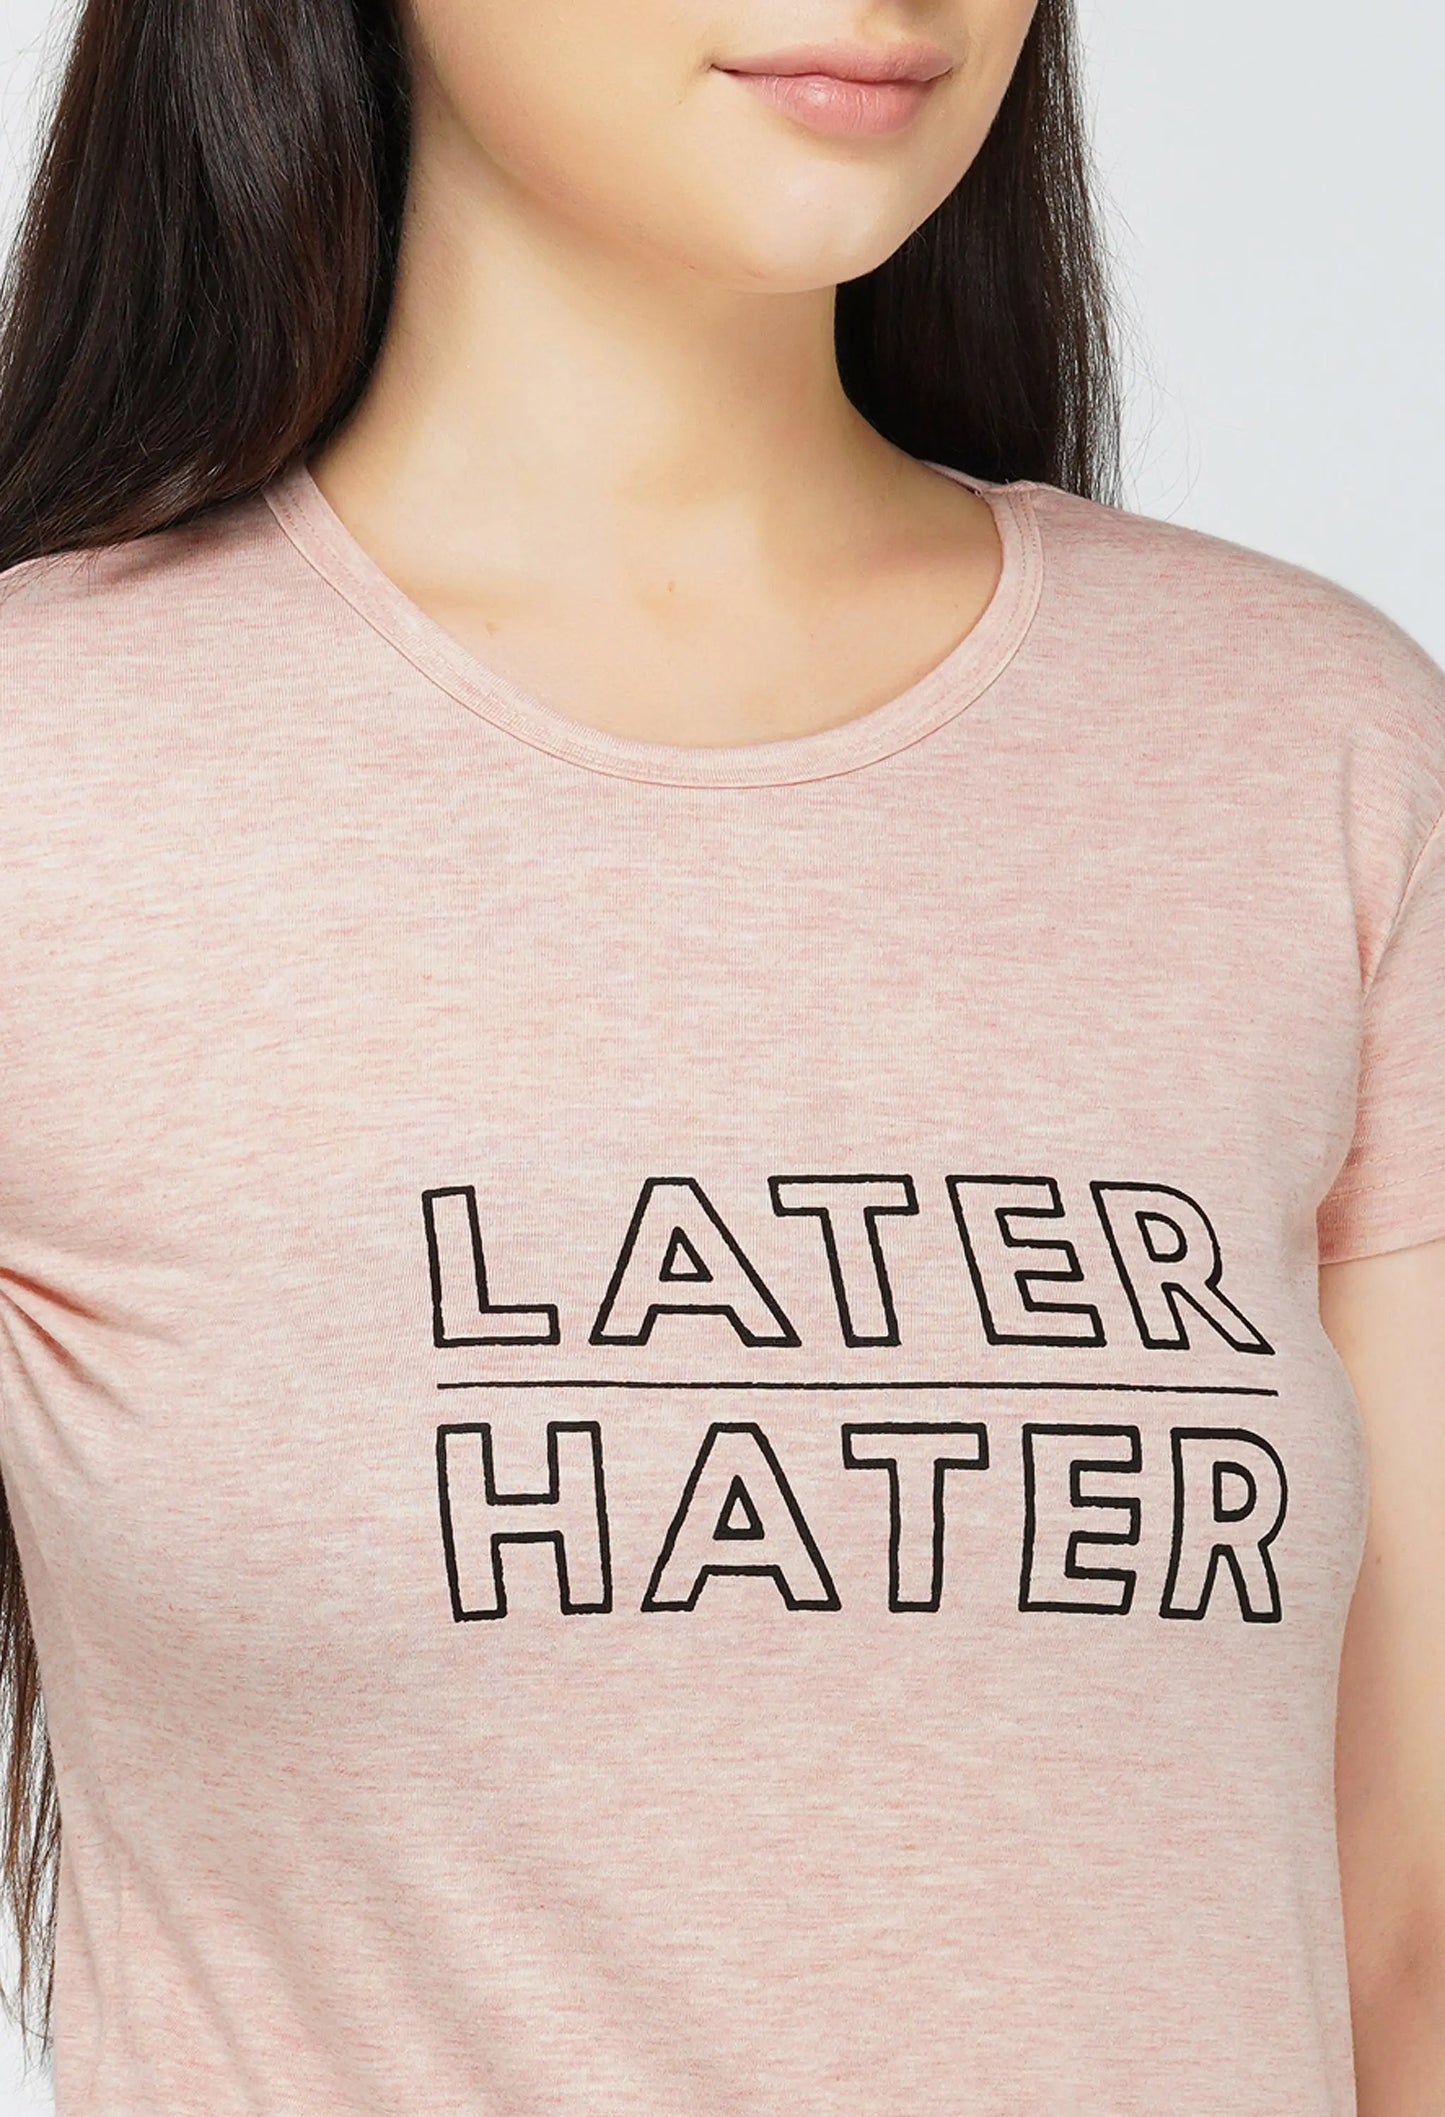 Later Hater - Women Tee Strong Soul T Shirt